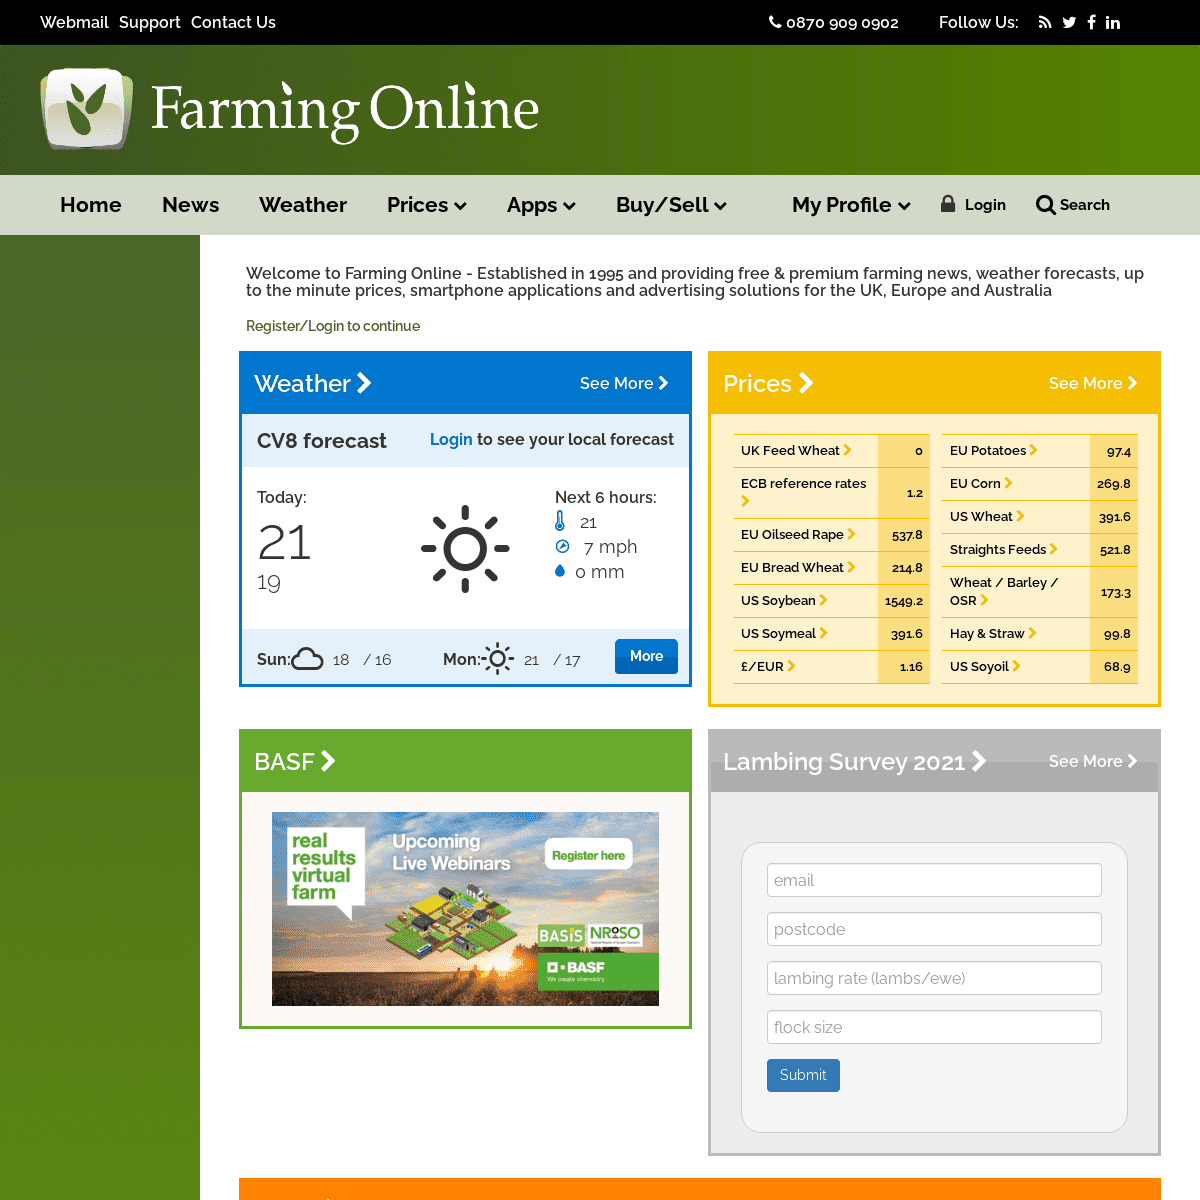 A complete backup of https://farming.co.uk